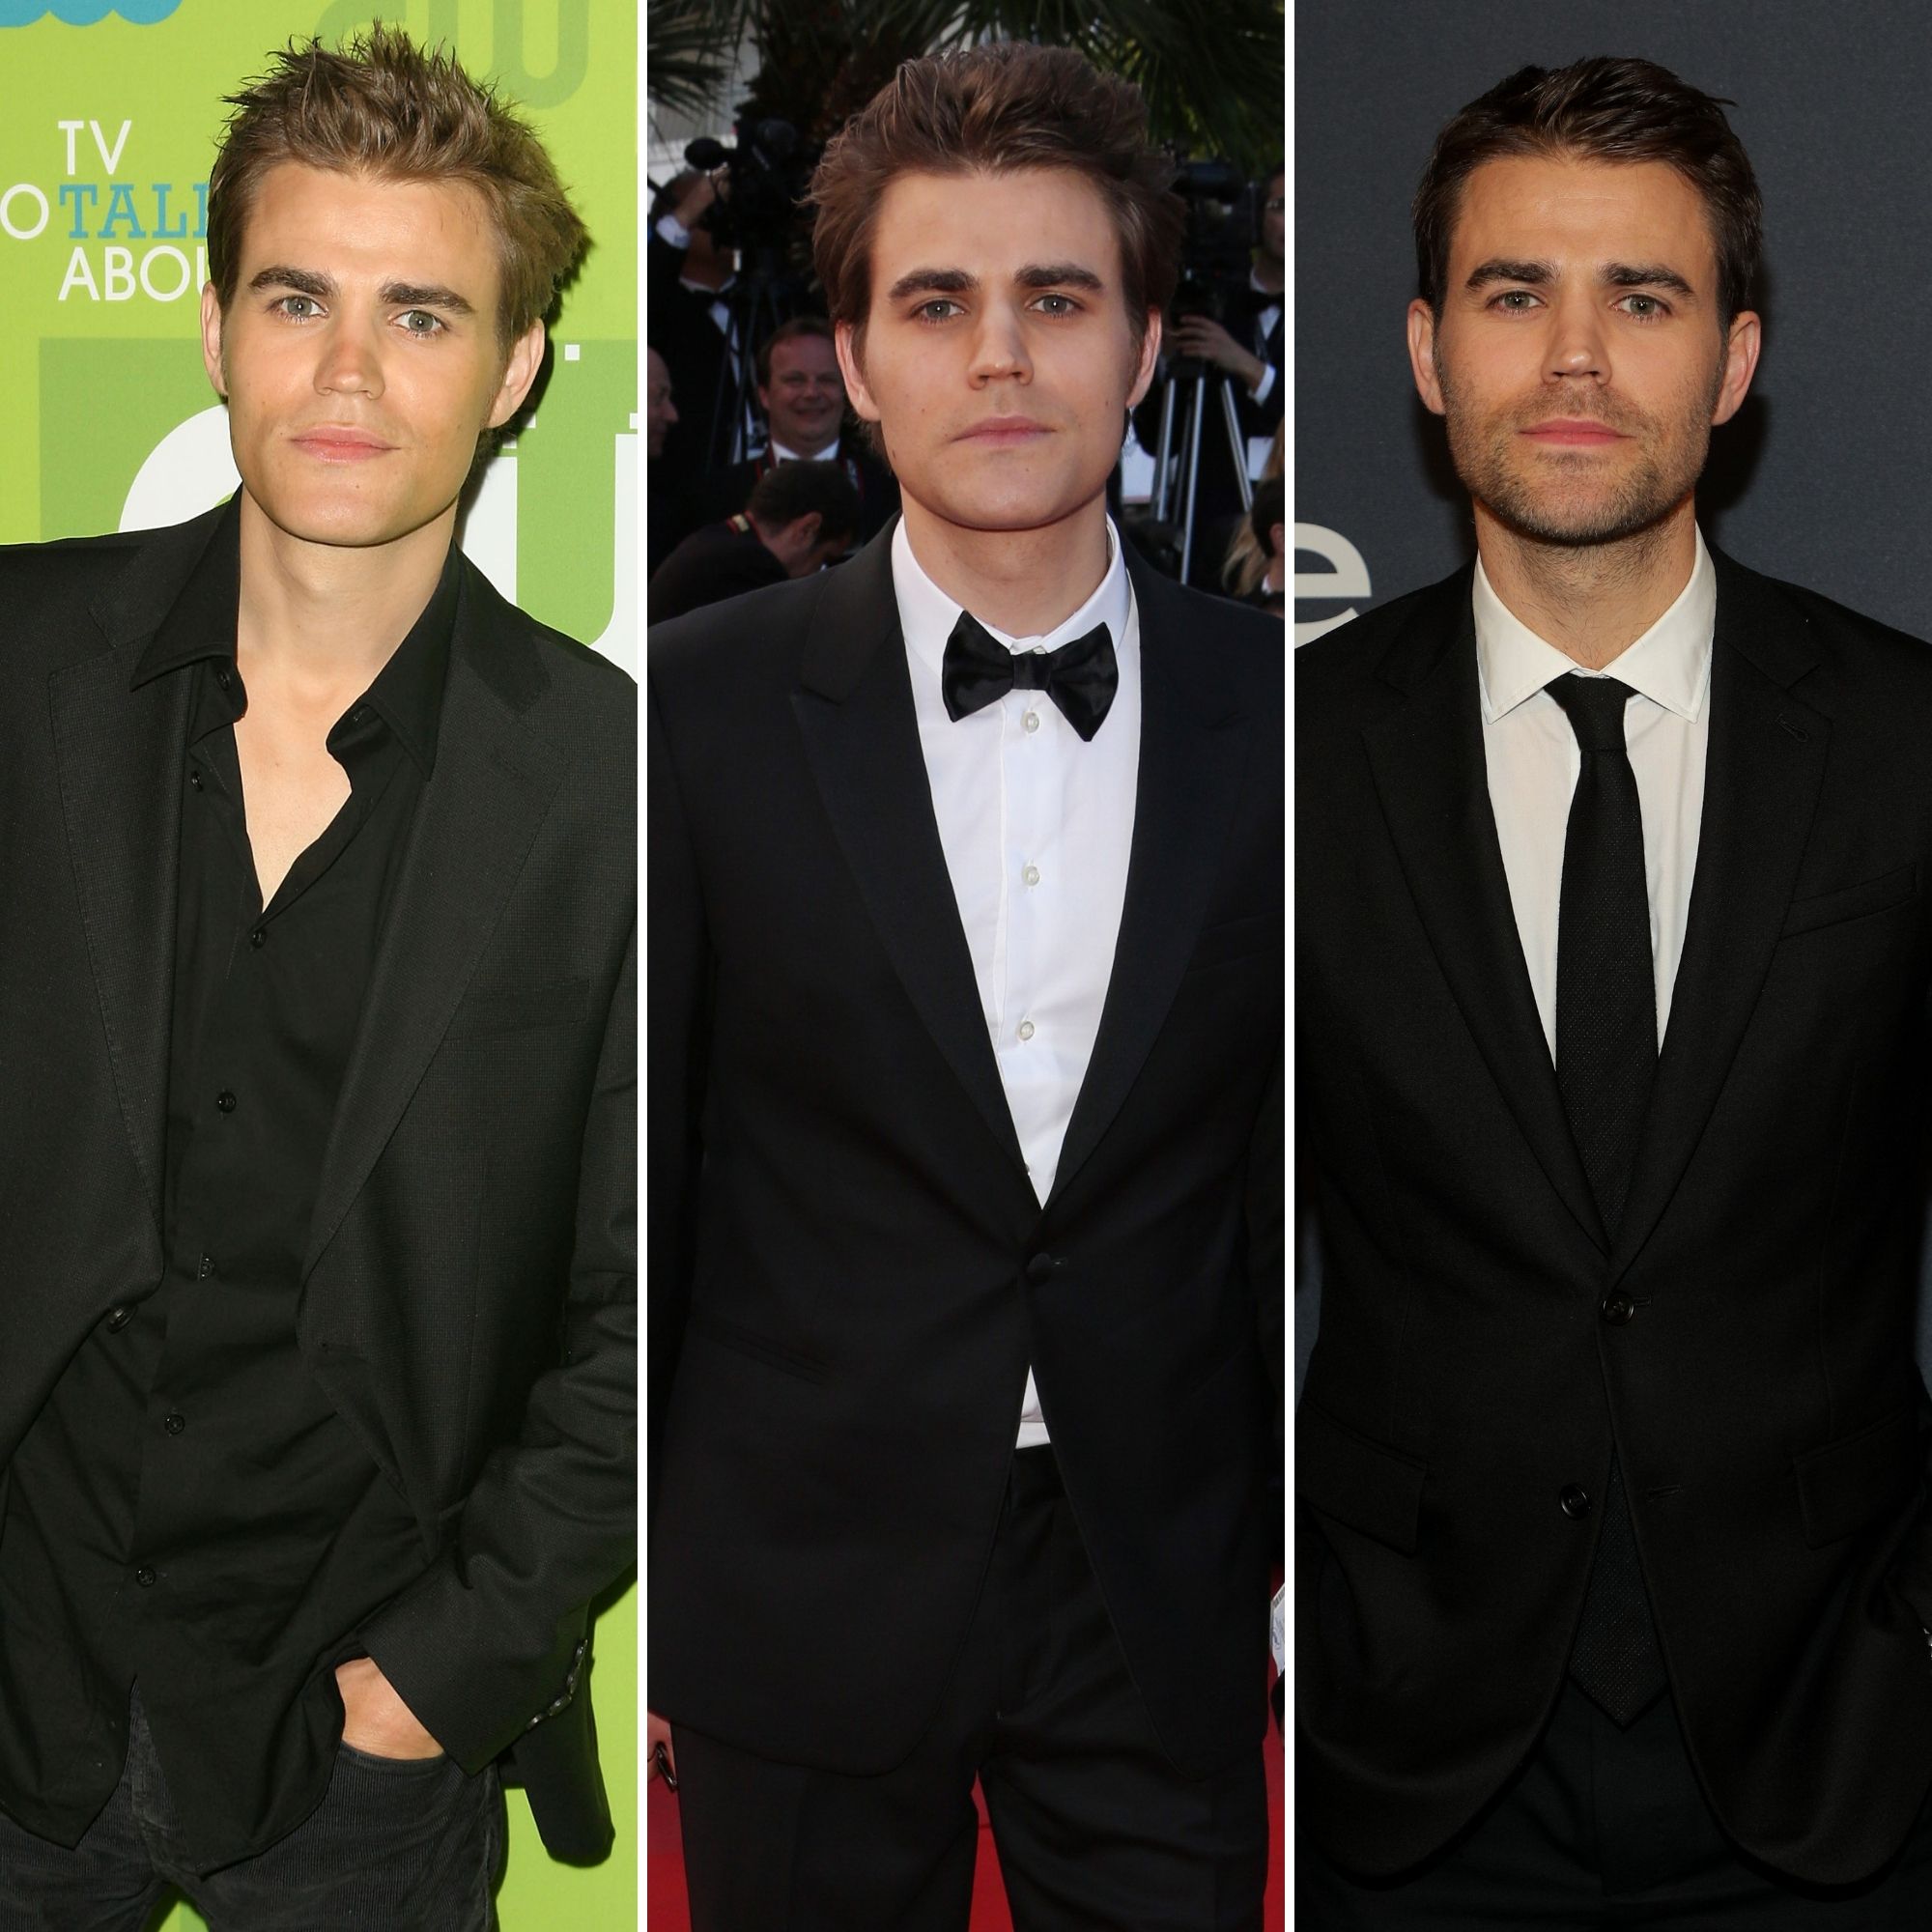 Photos from The Vampire Diaries Cast: Where Are They Now?